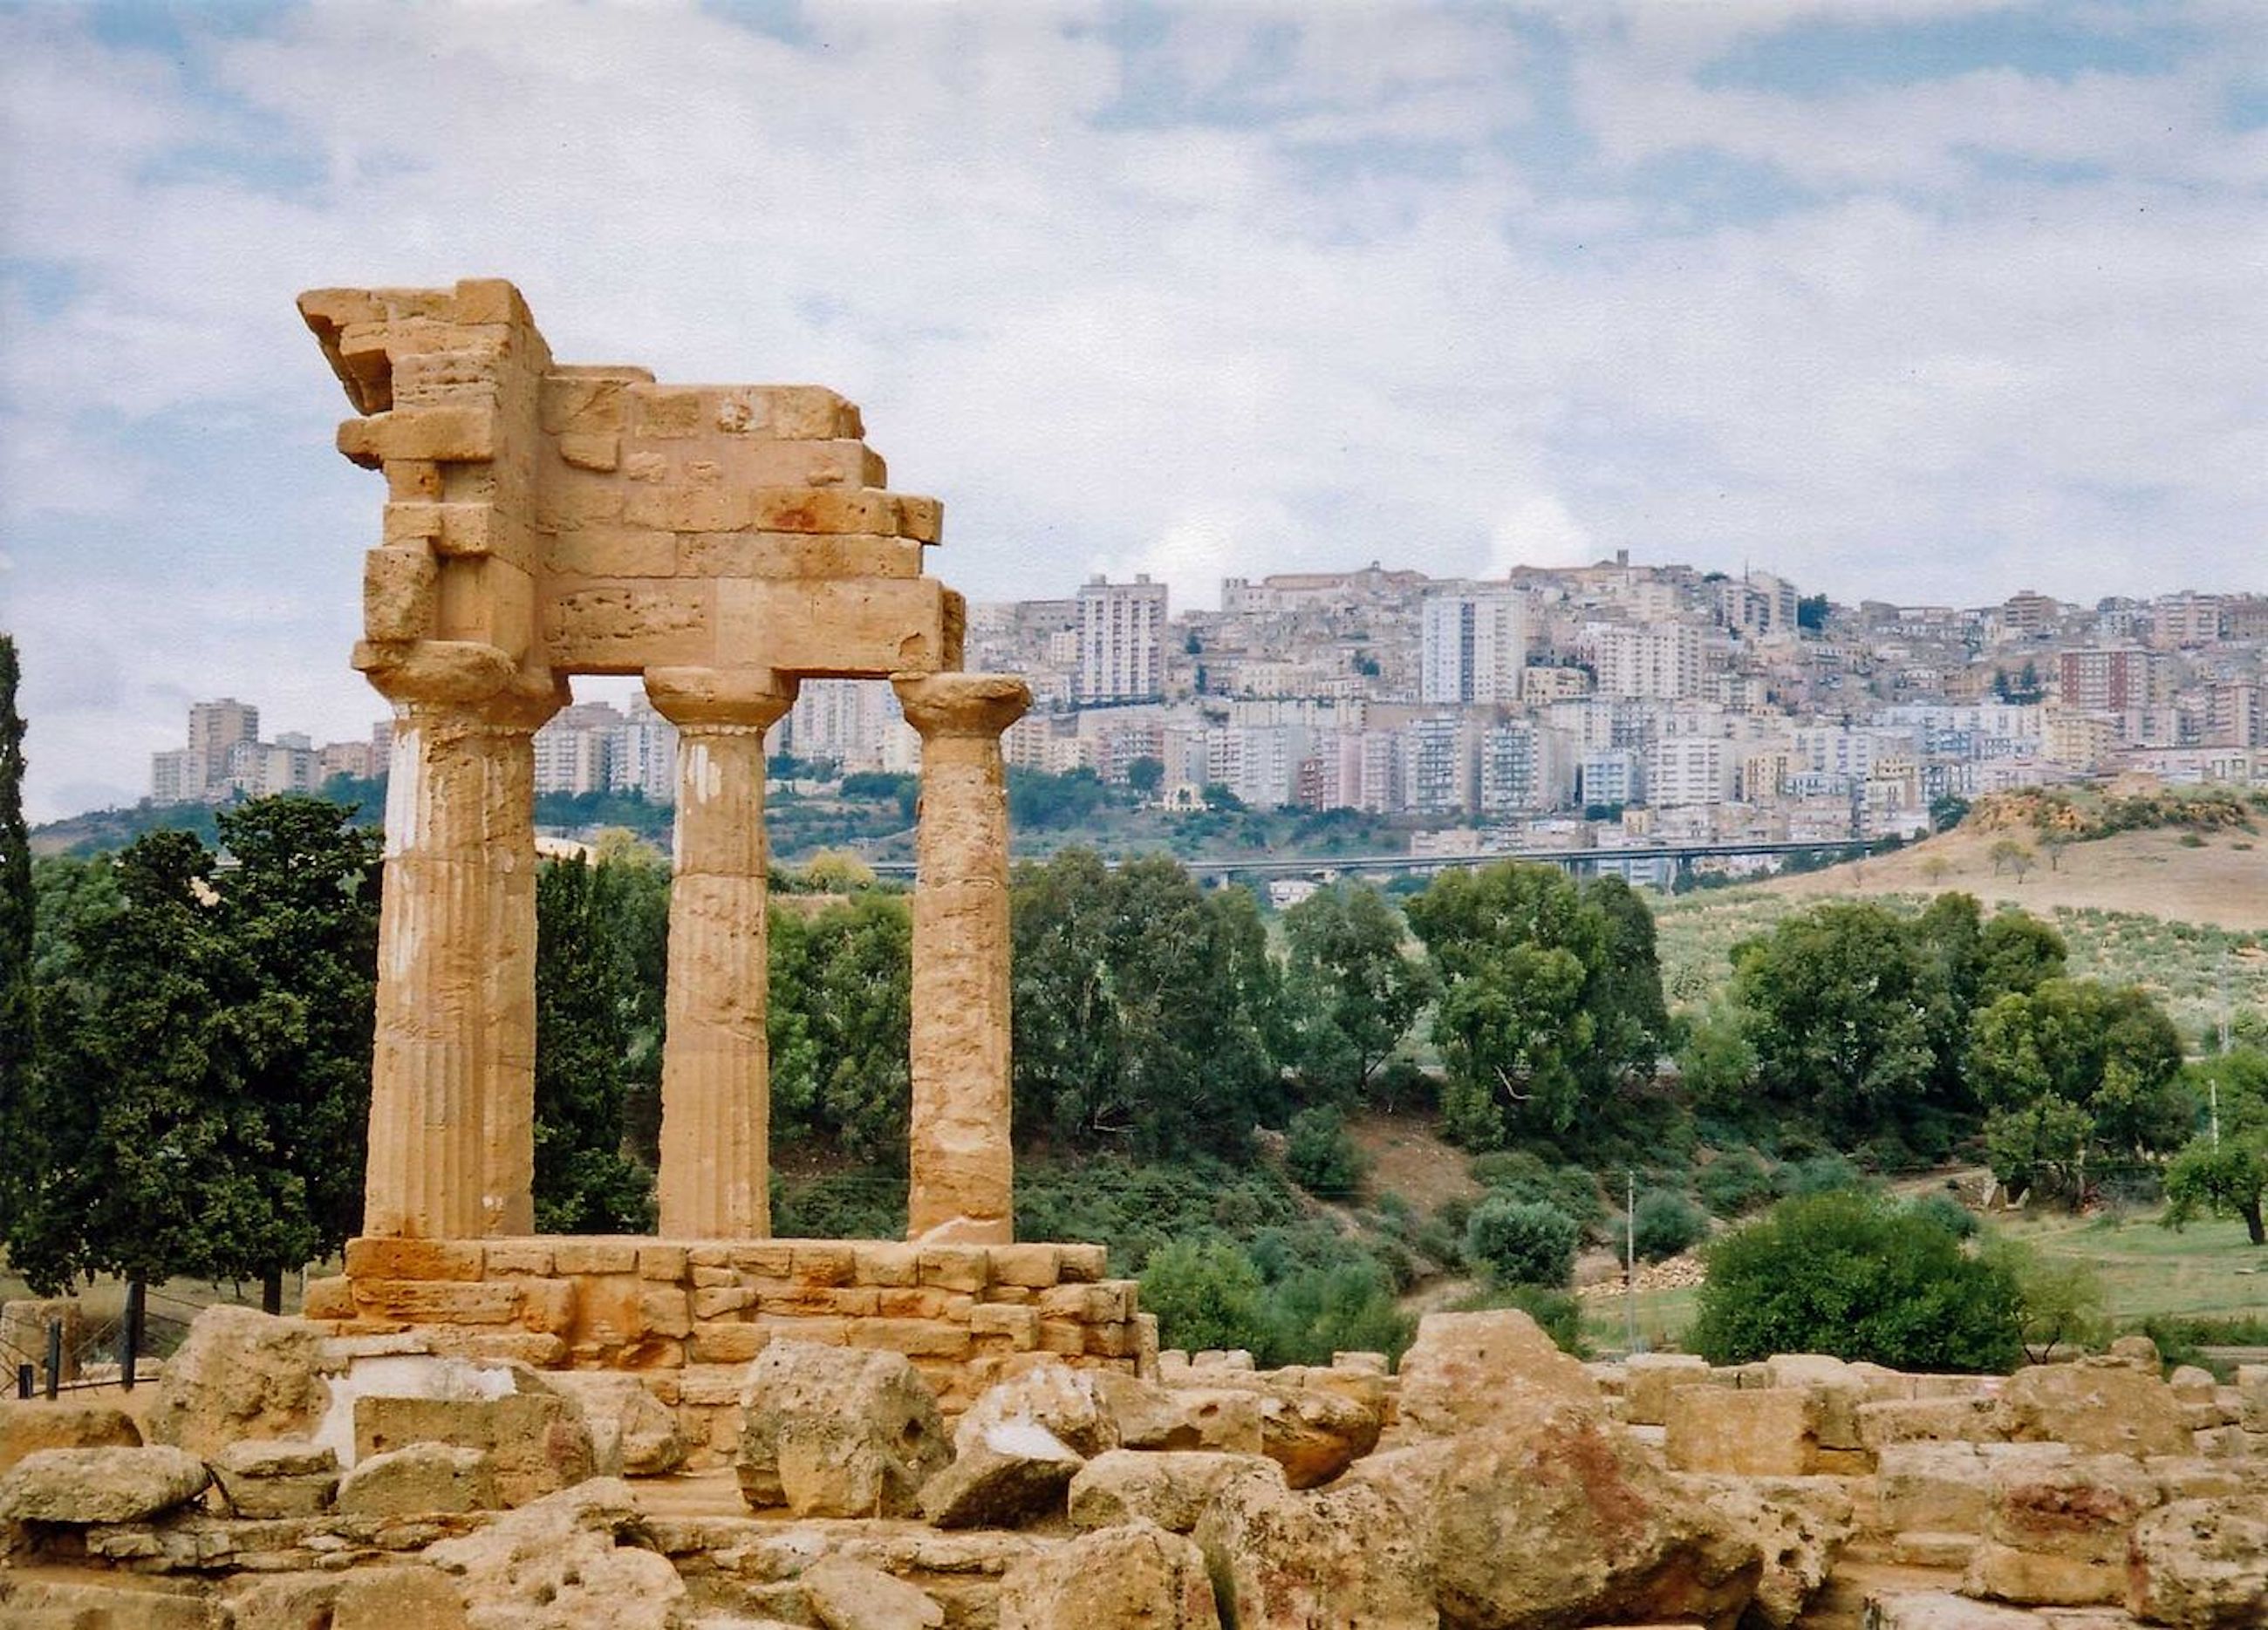 The ancient and modern city of Agrigento, Sicily